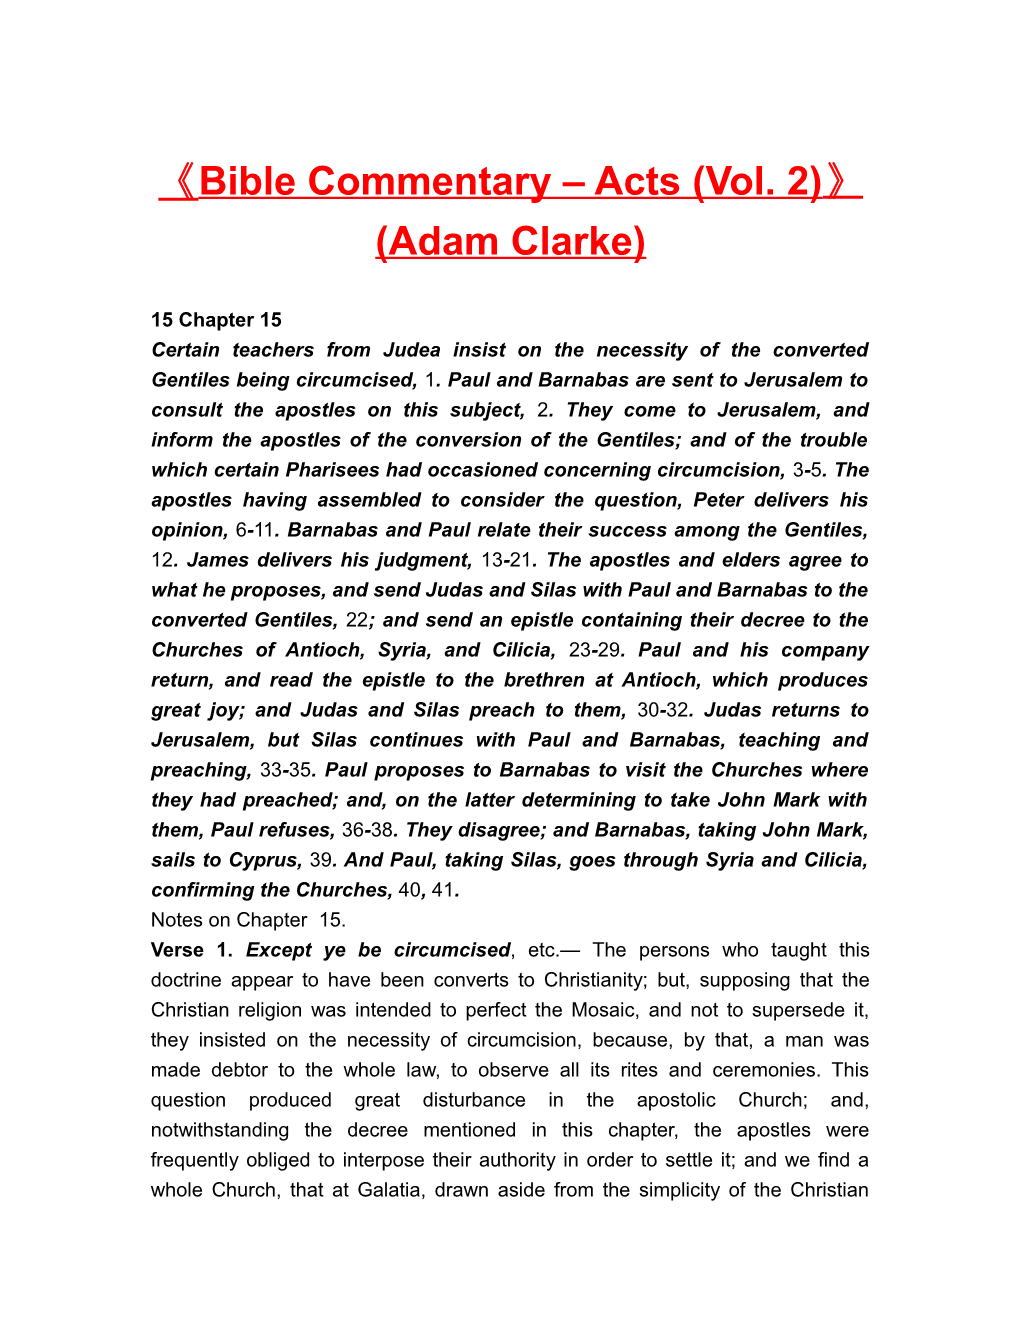 Bible Commentary Acts (Vol. 2) (Adam Clarke)